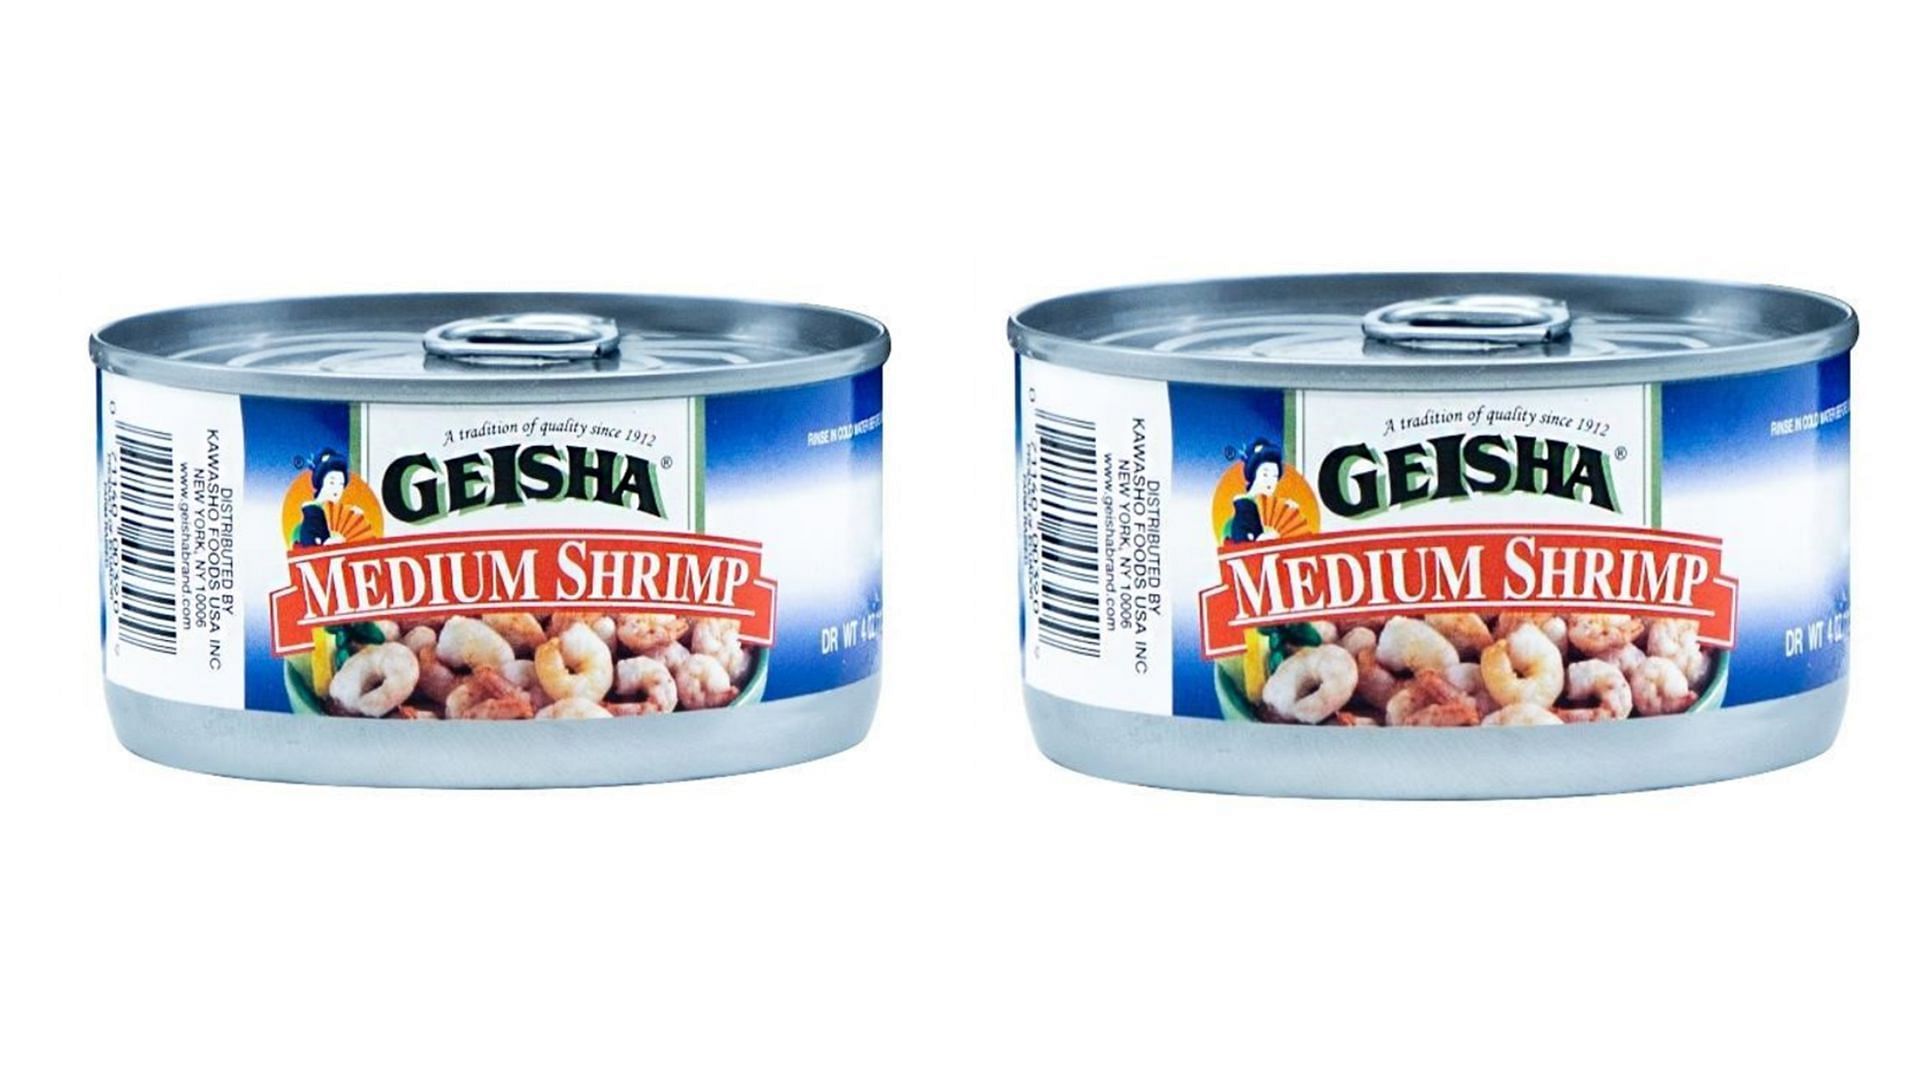 At least one lot of 4 oz. GEISHA Medium Shrimp sold across California, Utah, Arizona, and Colorado is being recalled over contamination concerns (Image via Food and Drug Administration)